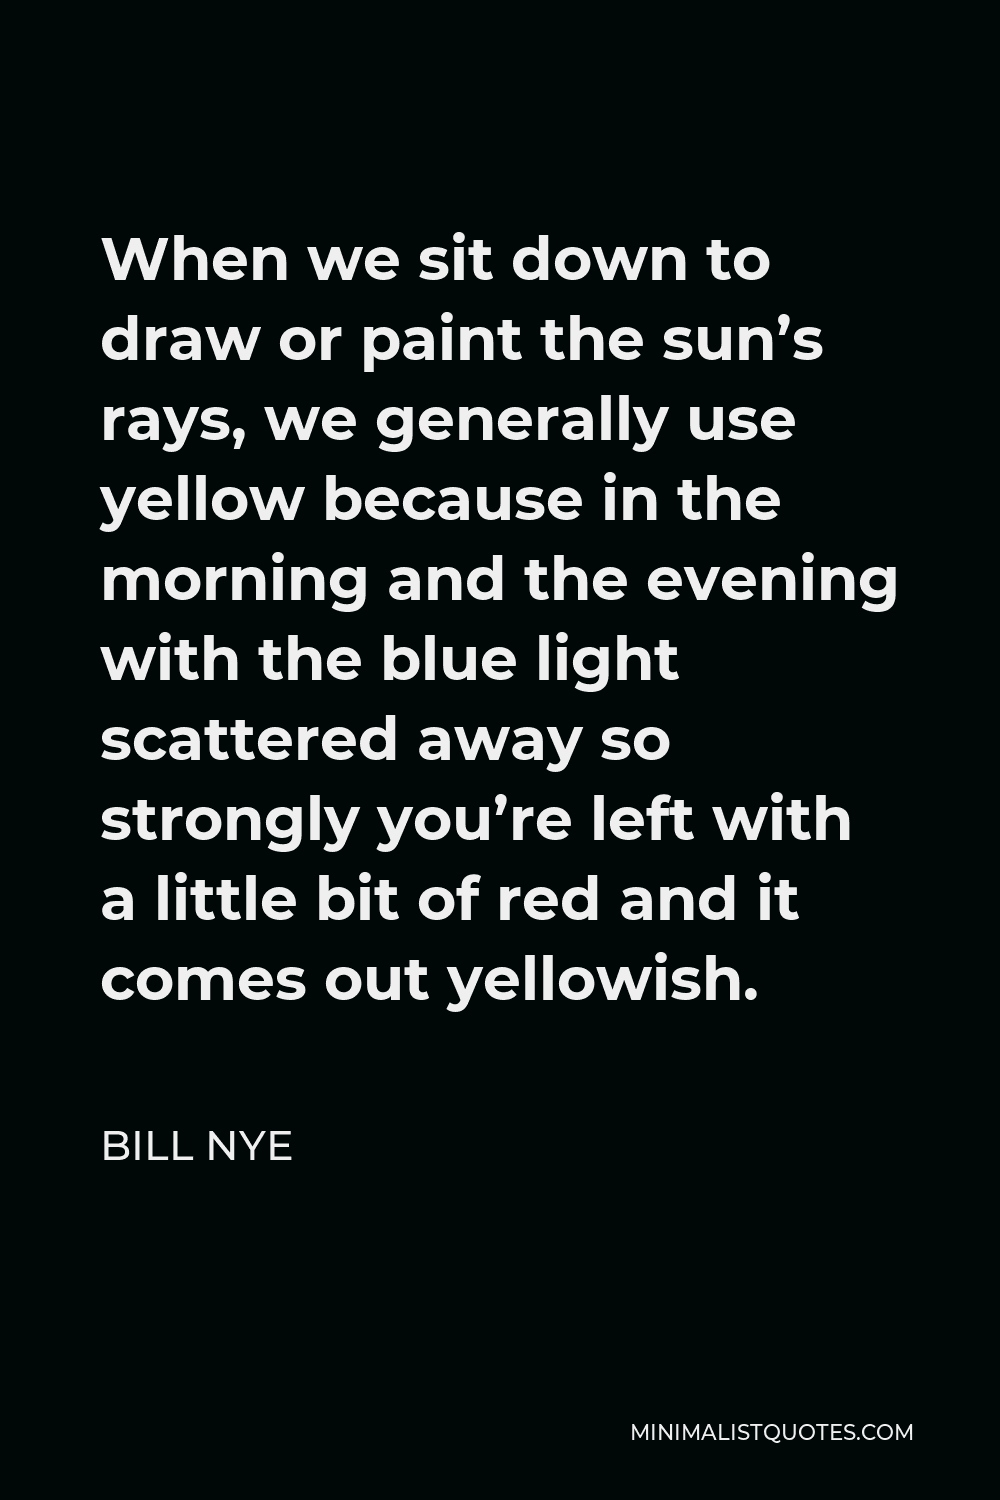 Bill Nye Quote - When we sit down to draw or paint the sun’s rays, we generally use yellow because in the morning and the evening with the blue light scattered away so strongly you’re left with a little bit of red and it comes out yellowish.